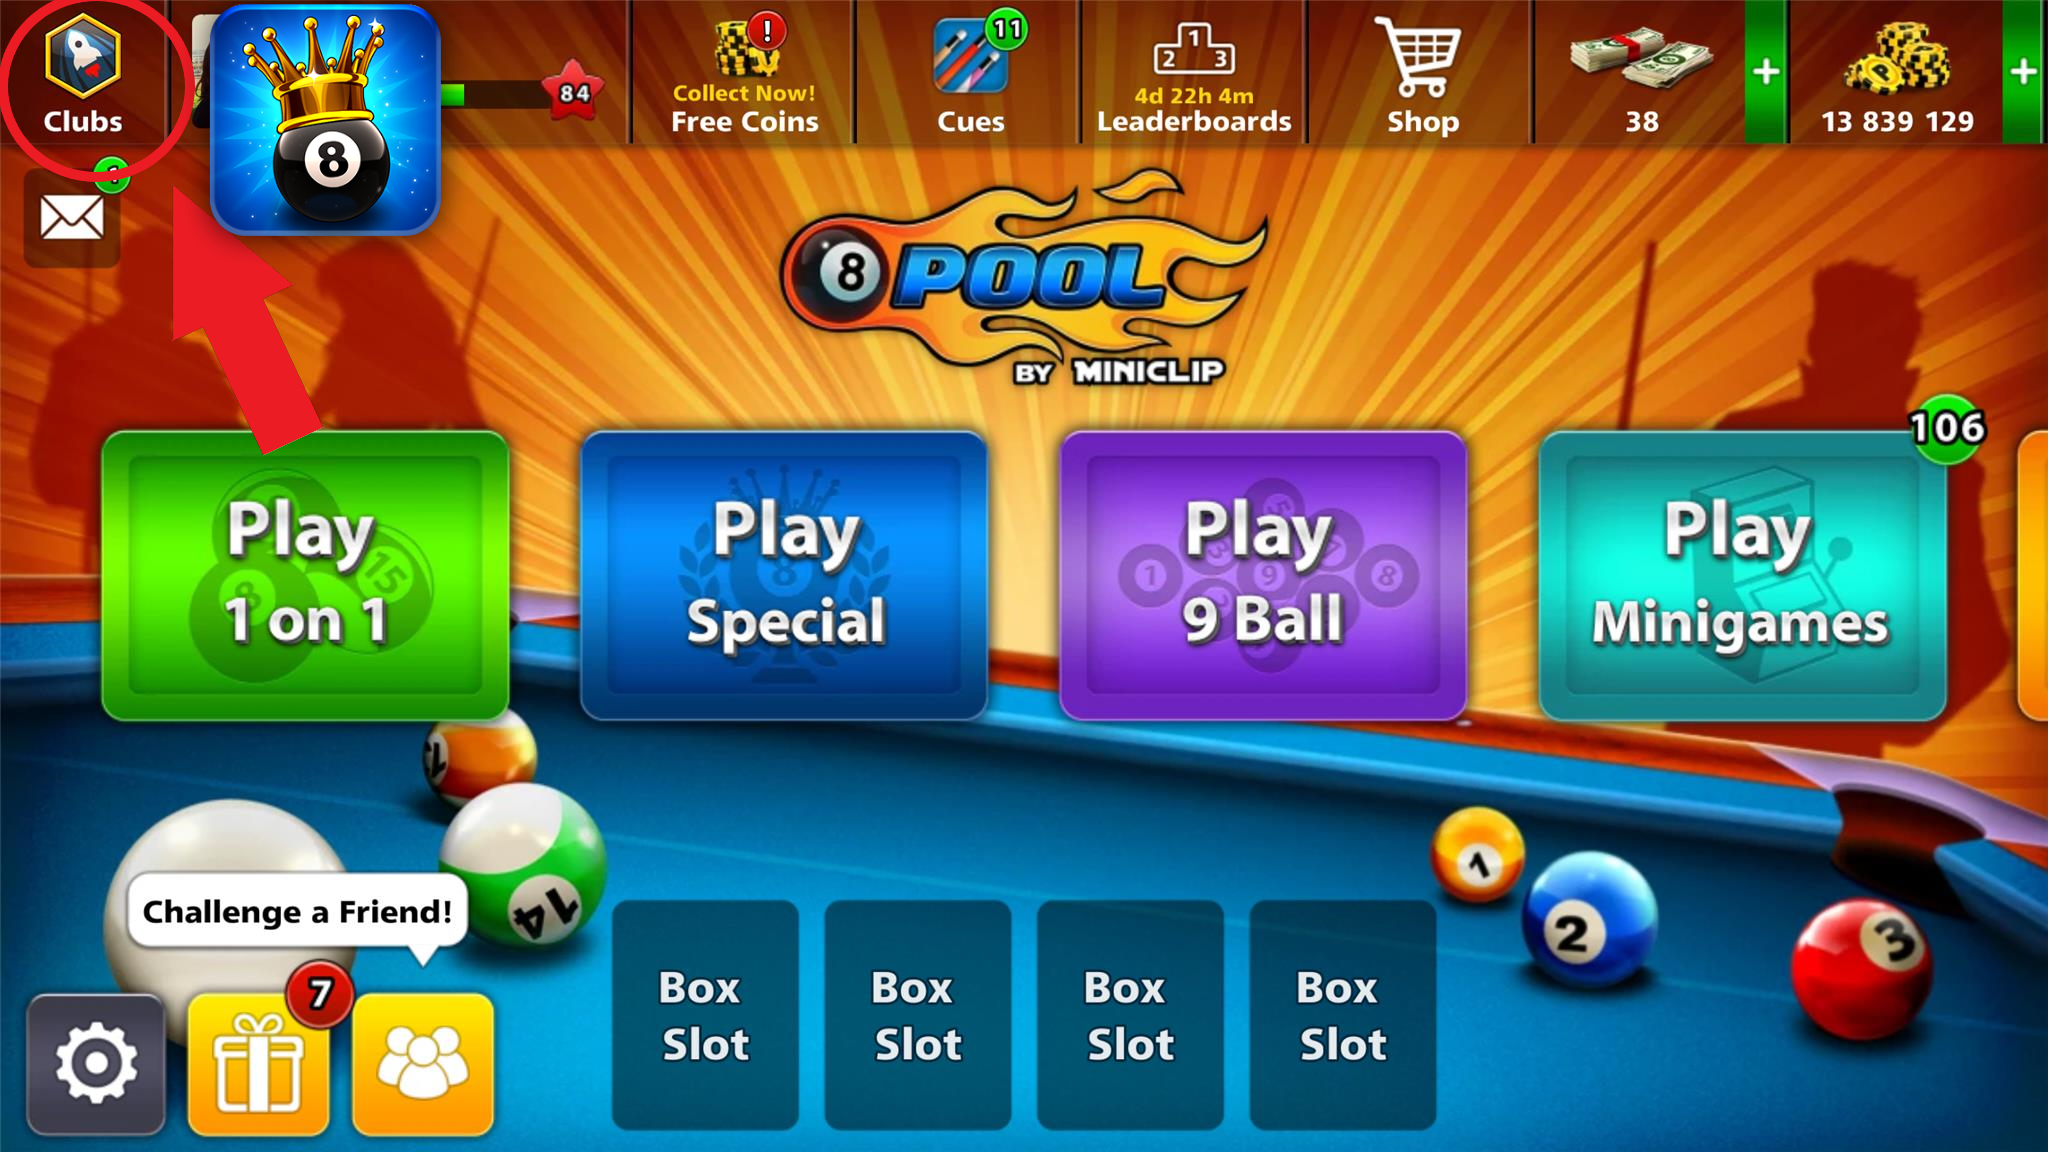 Clubs! What are they and how to create one? – Miniclip ... - 